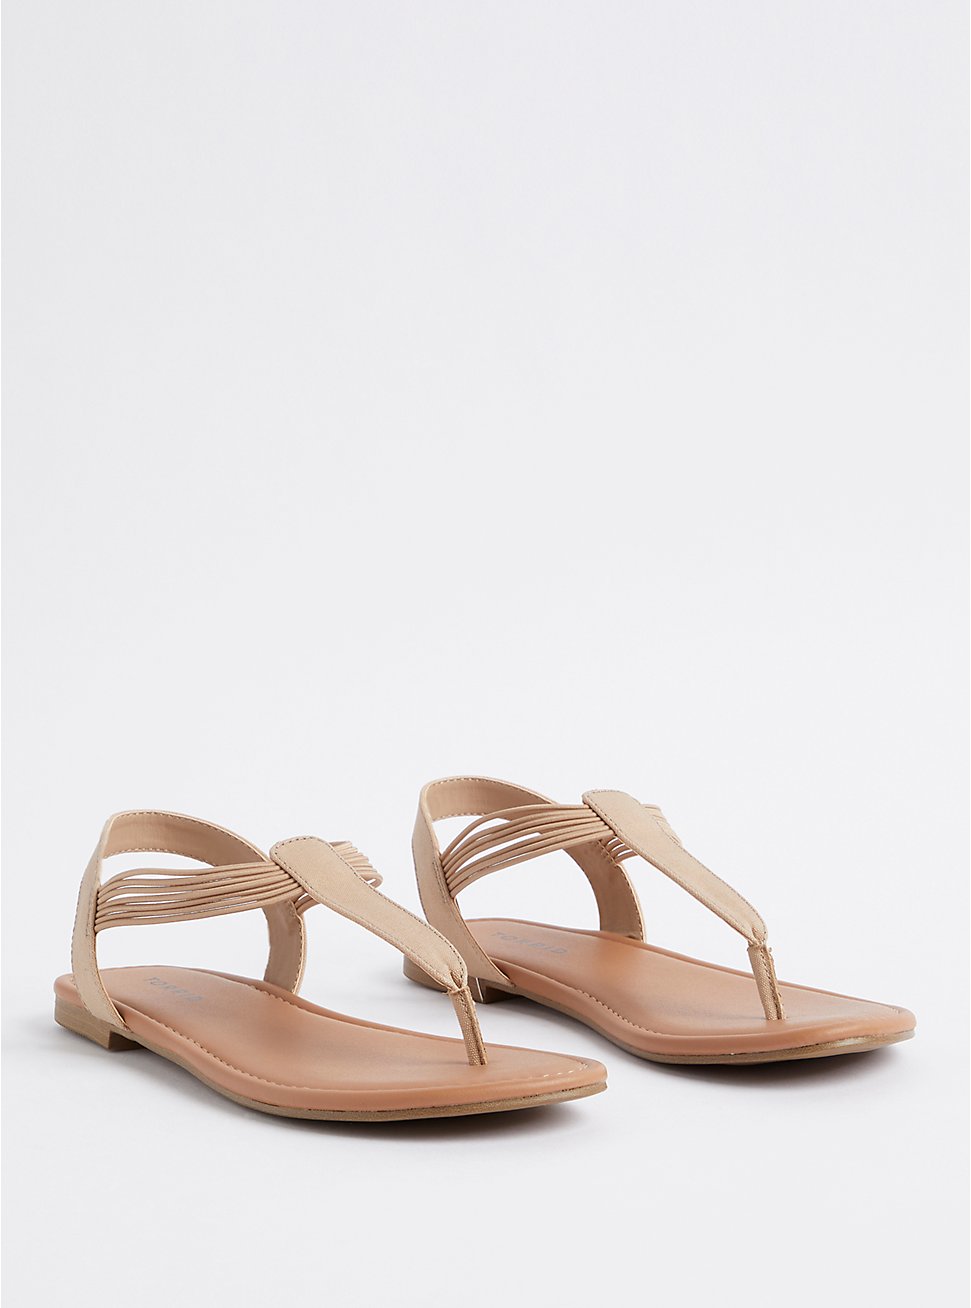 T-Strap Sandal - Stretch Canvas Taupe (WW), TAUPE, hi-res